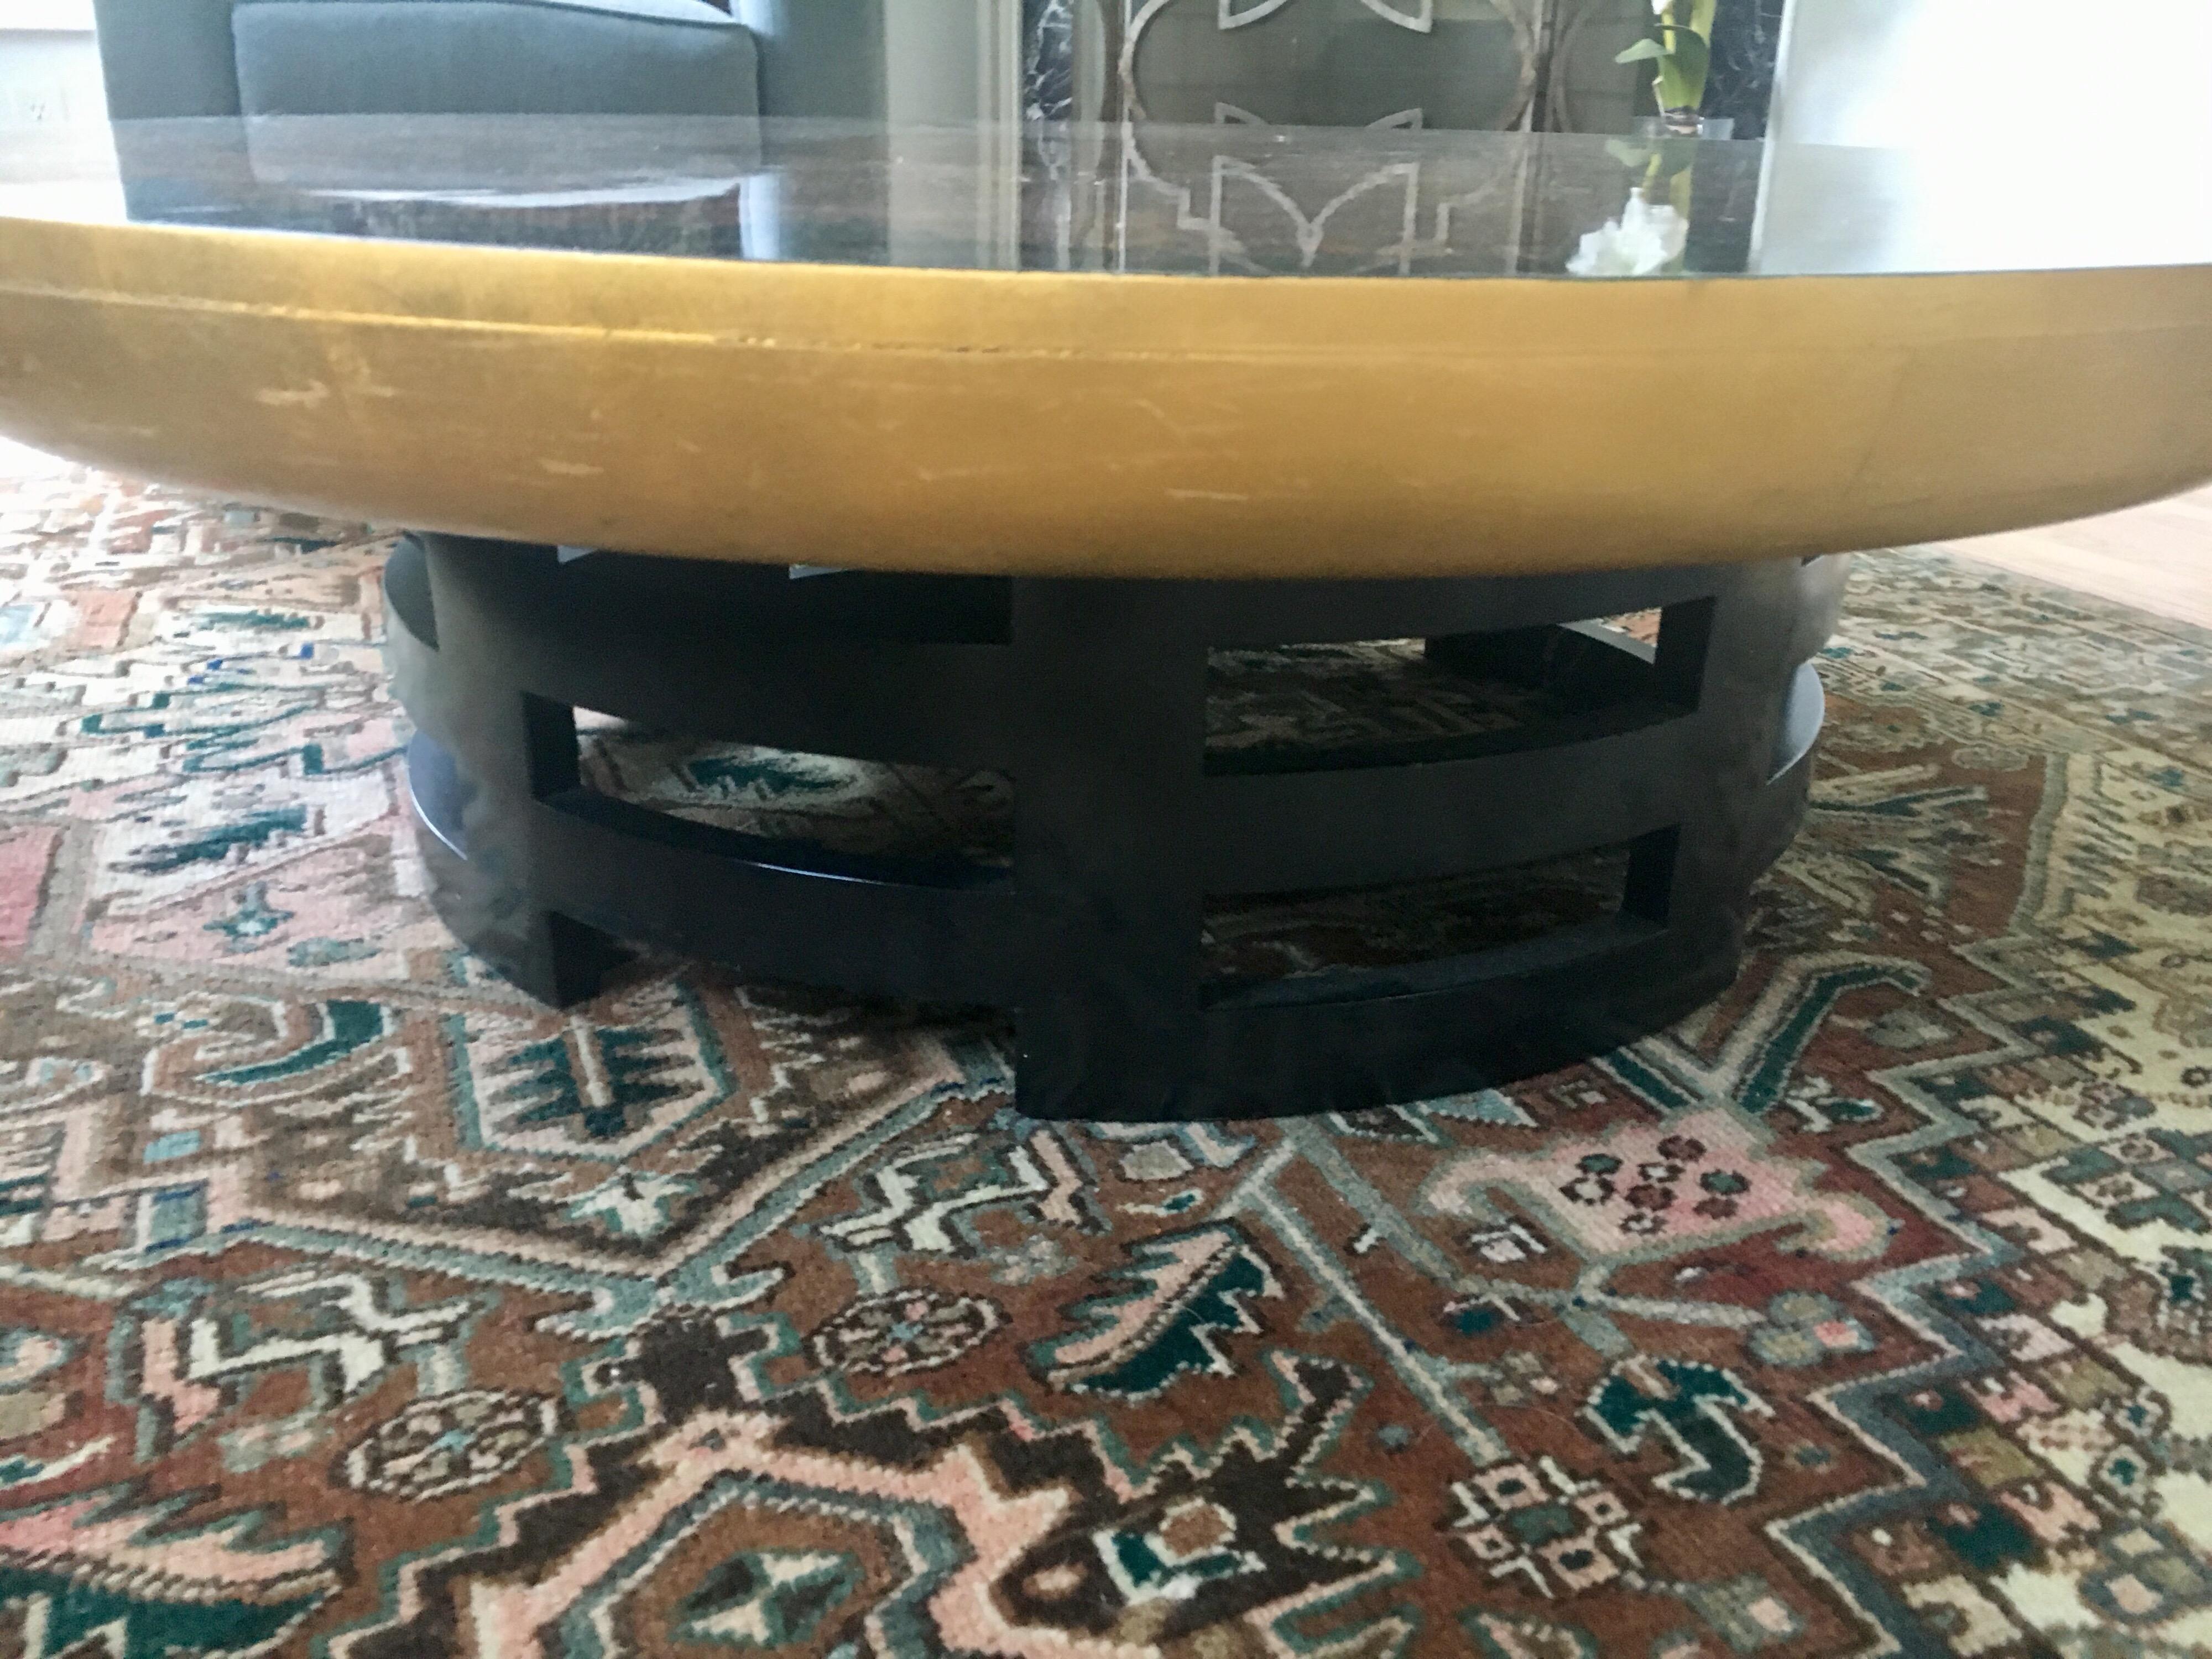 Coveted 1950s Hollywood Regency classic, the Kittinger Lotus table. We are selling it with the custom piece of glass on top.